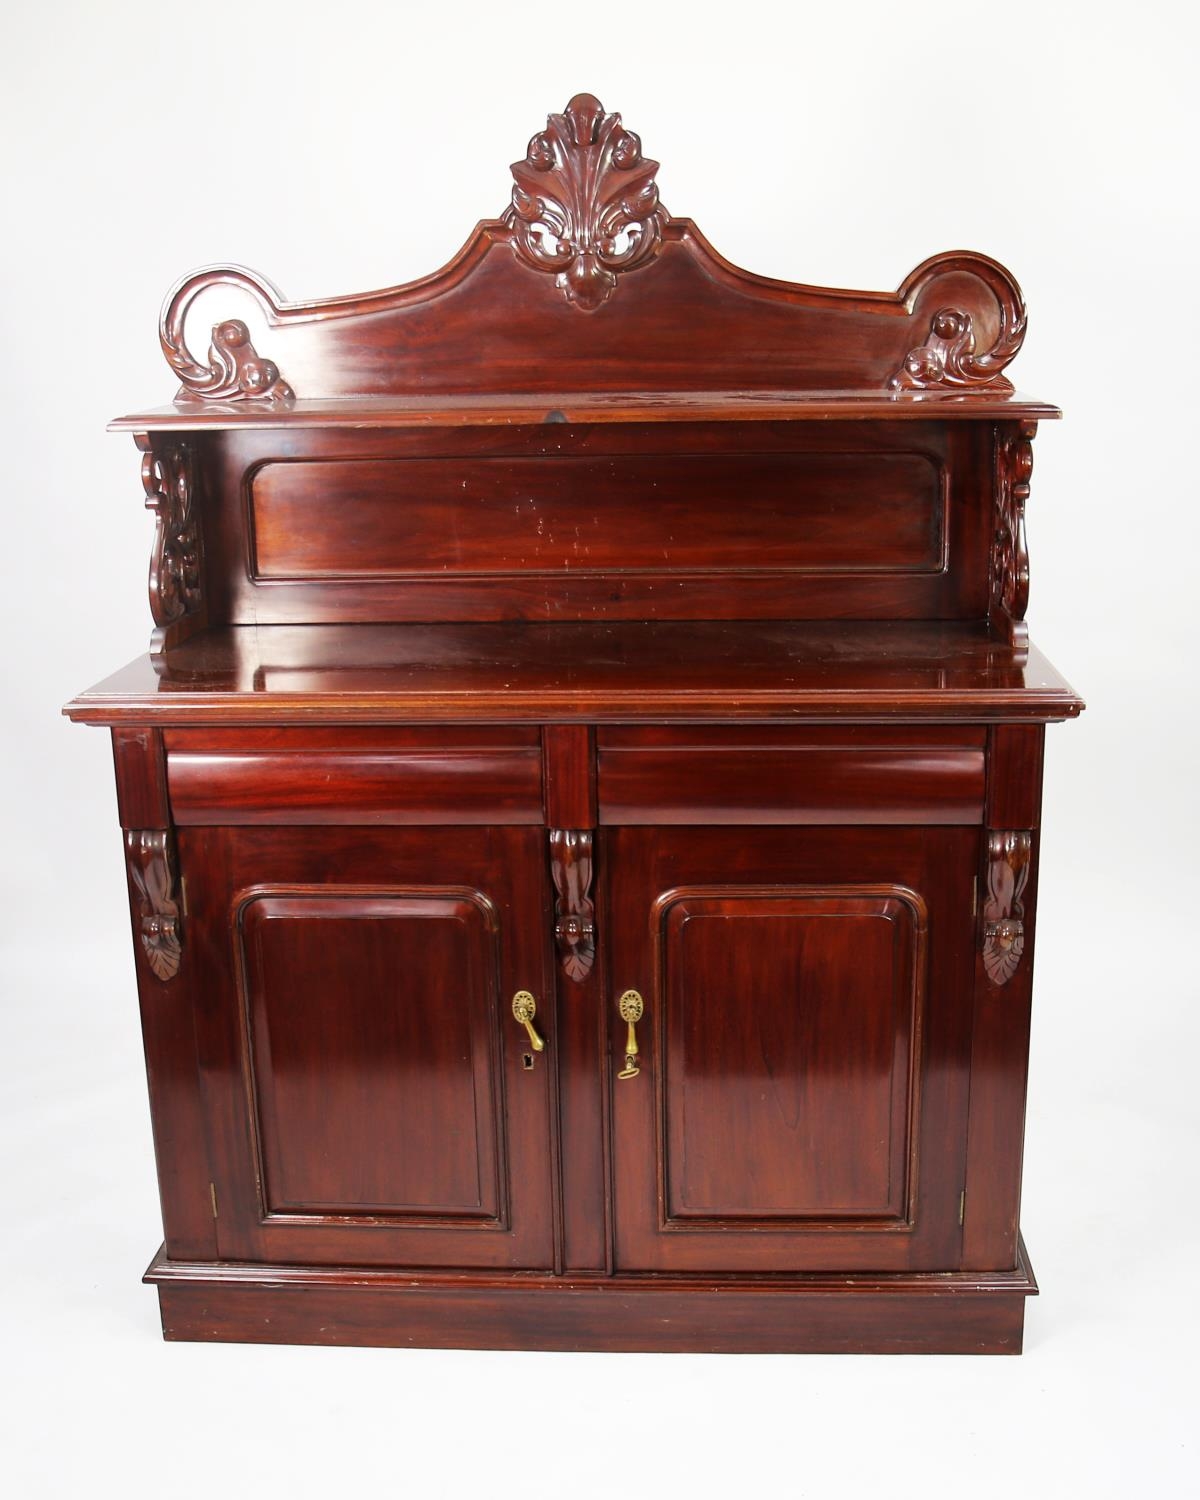 VICTORIAN STYLE MAHOGANY CHIFFONIER, the back with shell cresting above a single shelf with flat